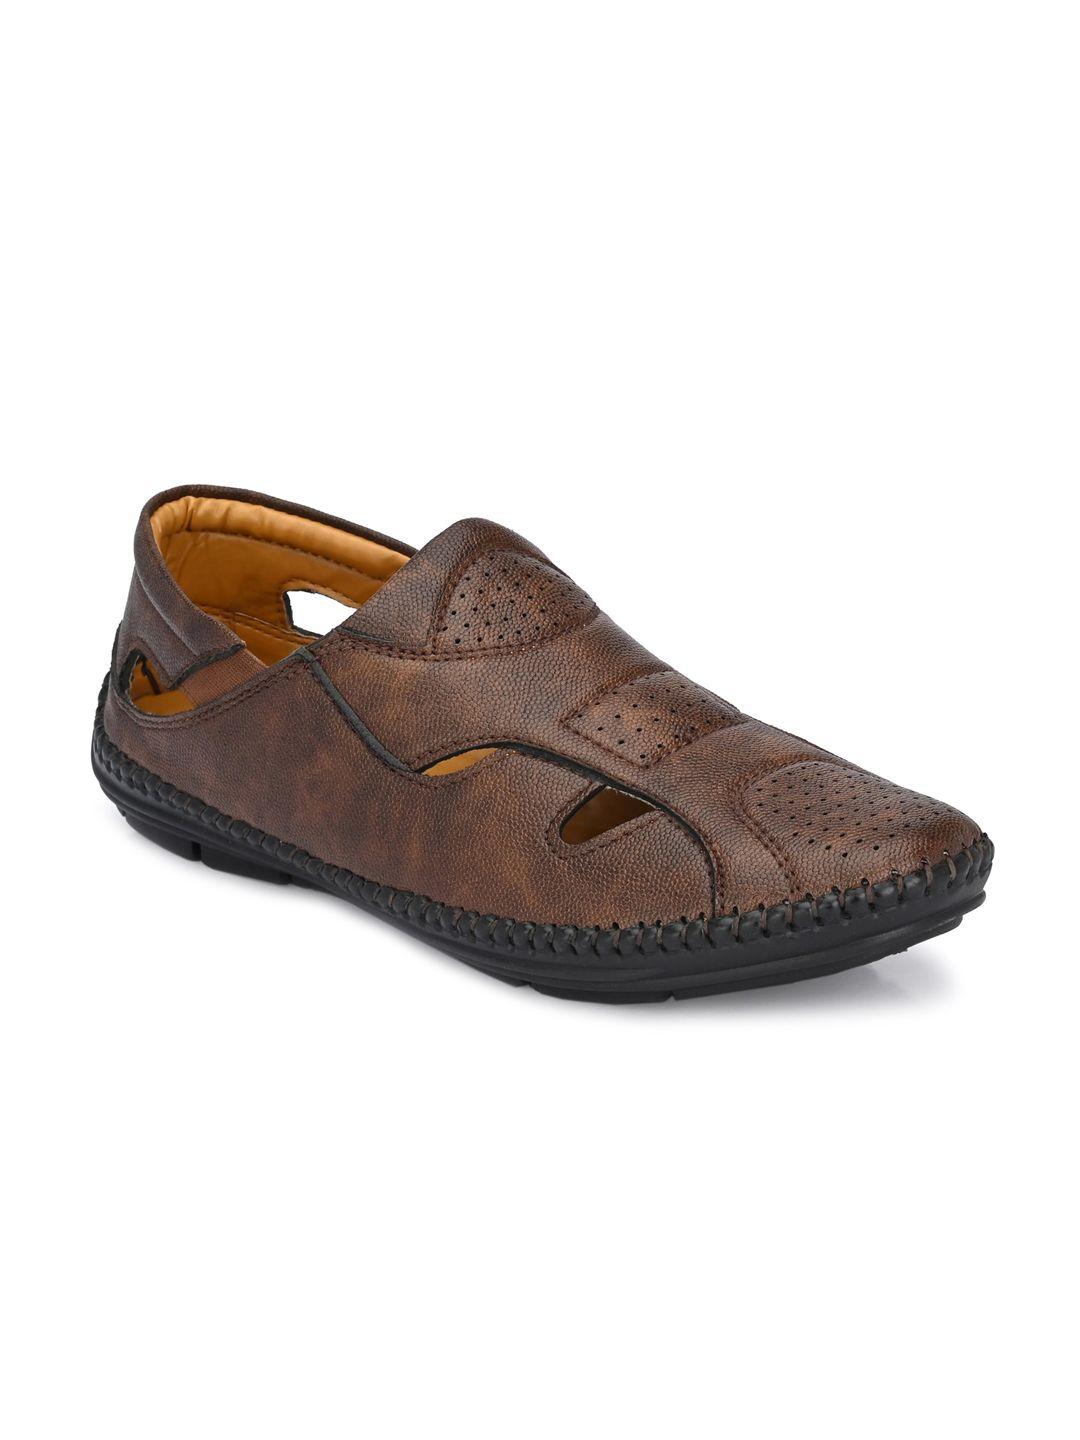 the roadster lifestyle co men brown shoe-style sandals